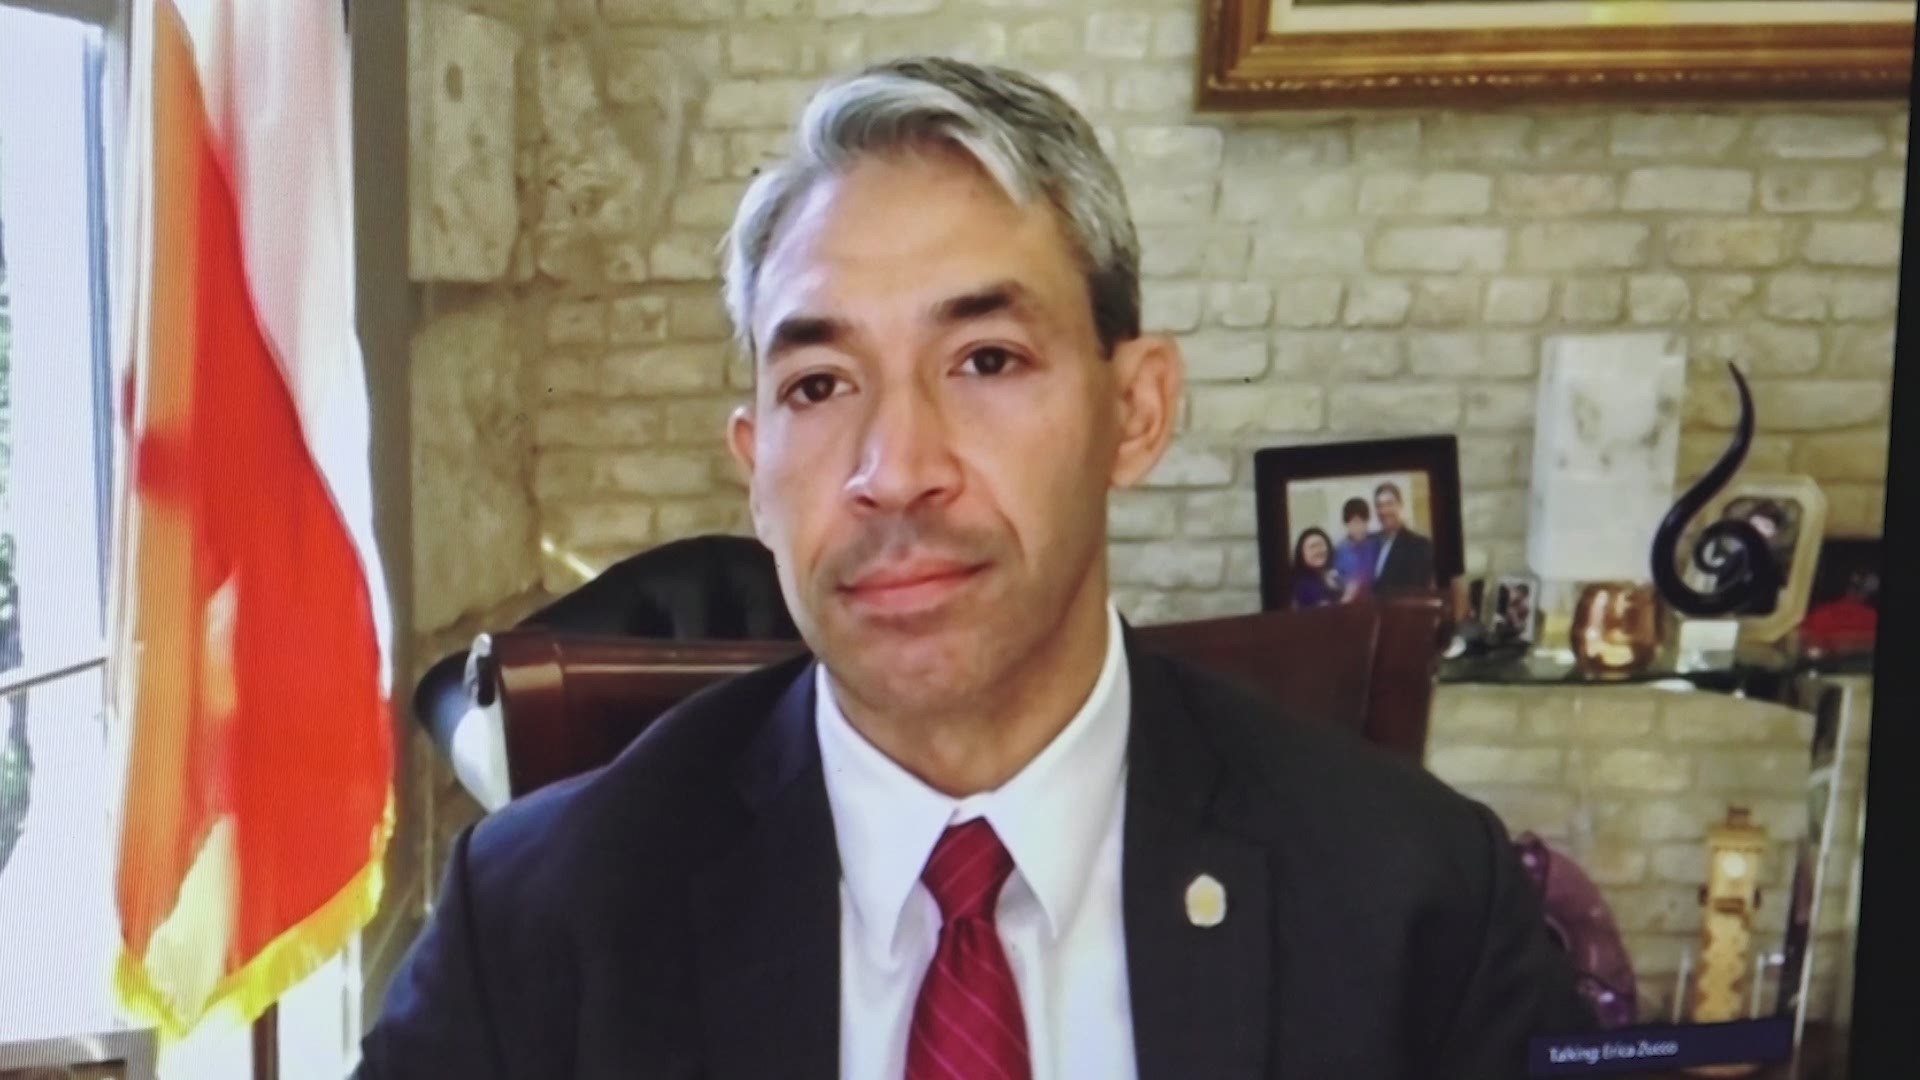 Mayor Ron Nirenberg discusses task force's proposed plan for workforce development, job training and economic recovery.